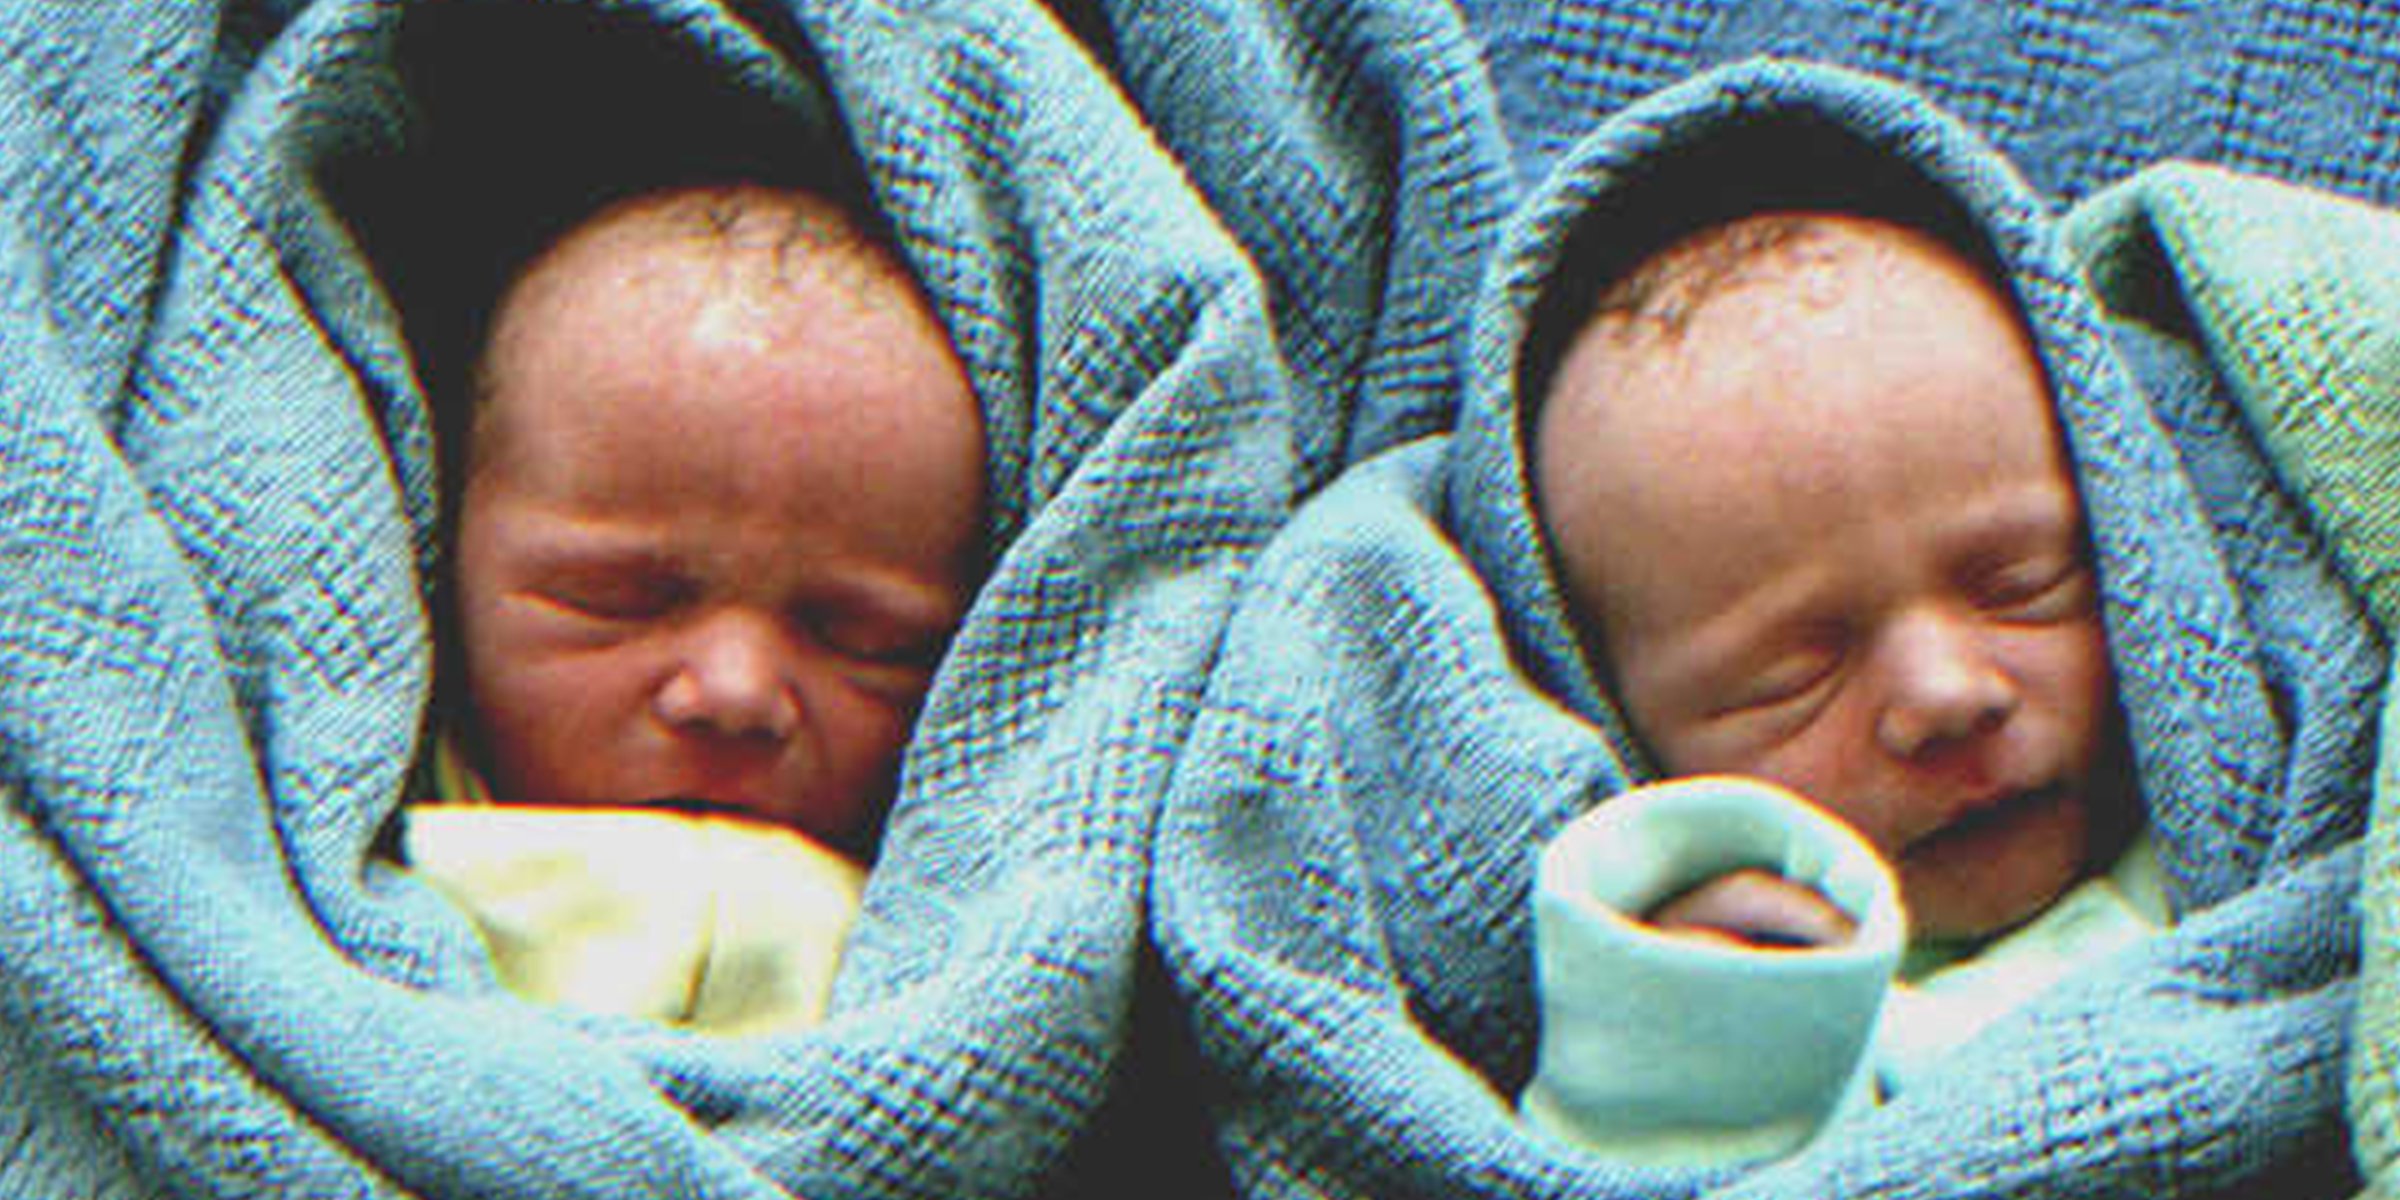 A pair of babies wrapped in a blue blanket | Source: Getty Images